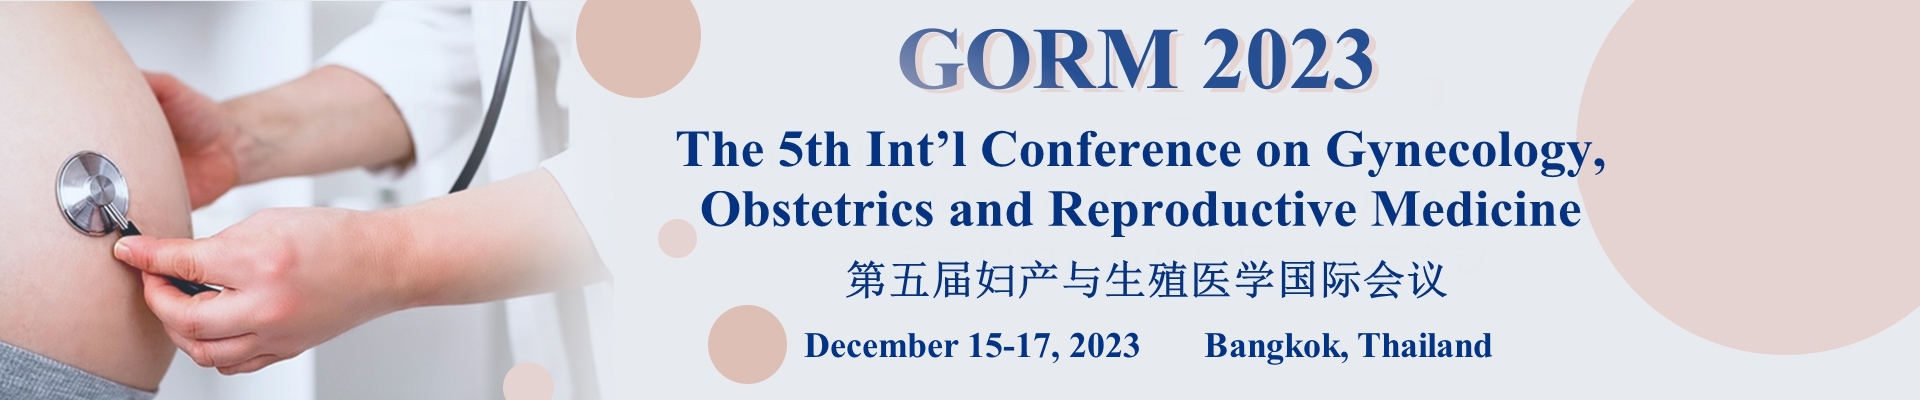 The 5th Int’l Conference on Gynecology, Obstetrics and Reproductive Medicine (GORM 2023), Bangkok, Thailand,Bangkok,Thailand